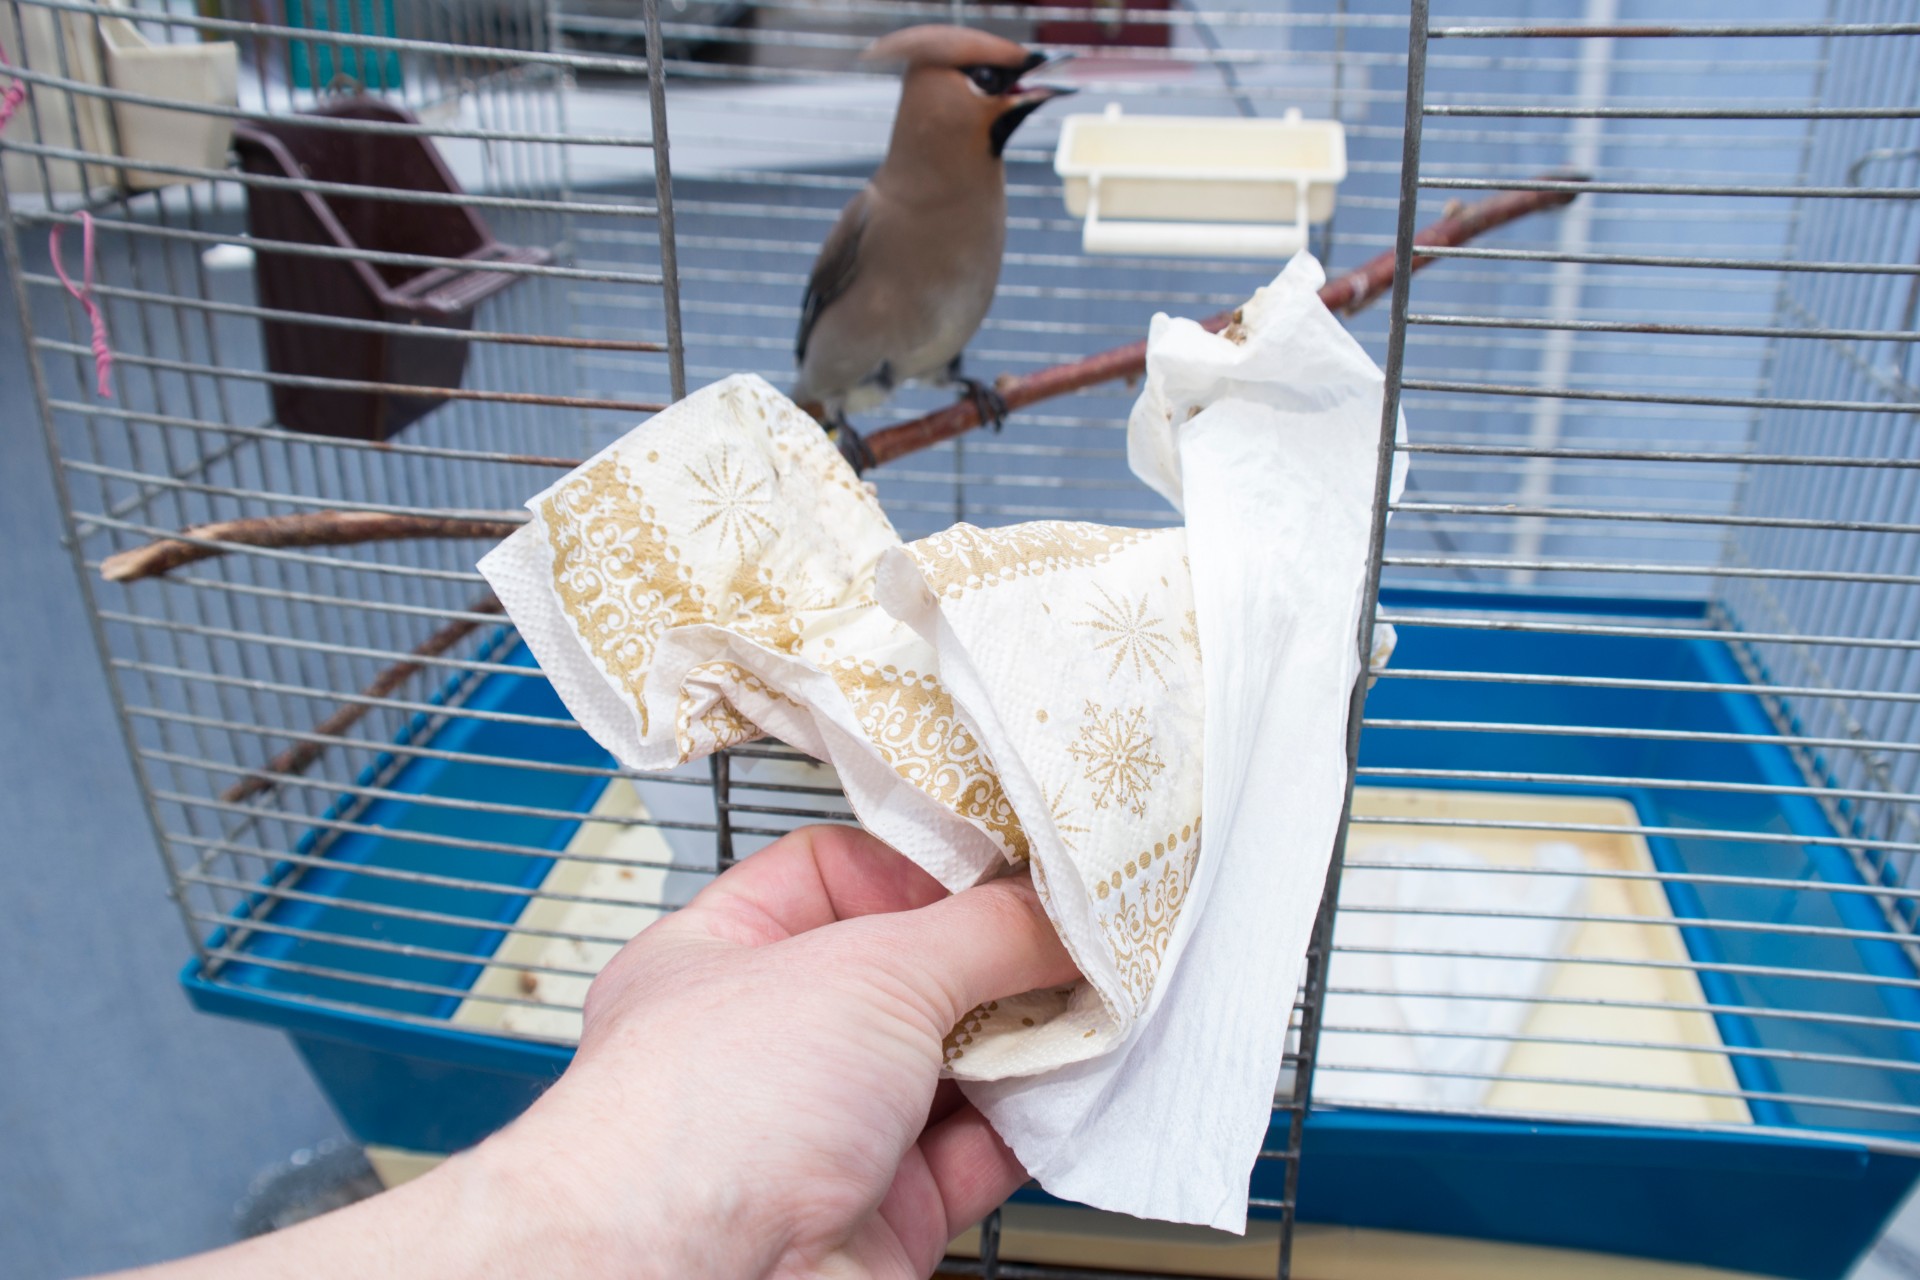 How To Clean A Bird Cage The Right Way | Pawtracks